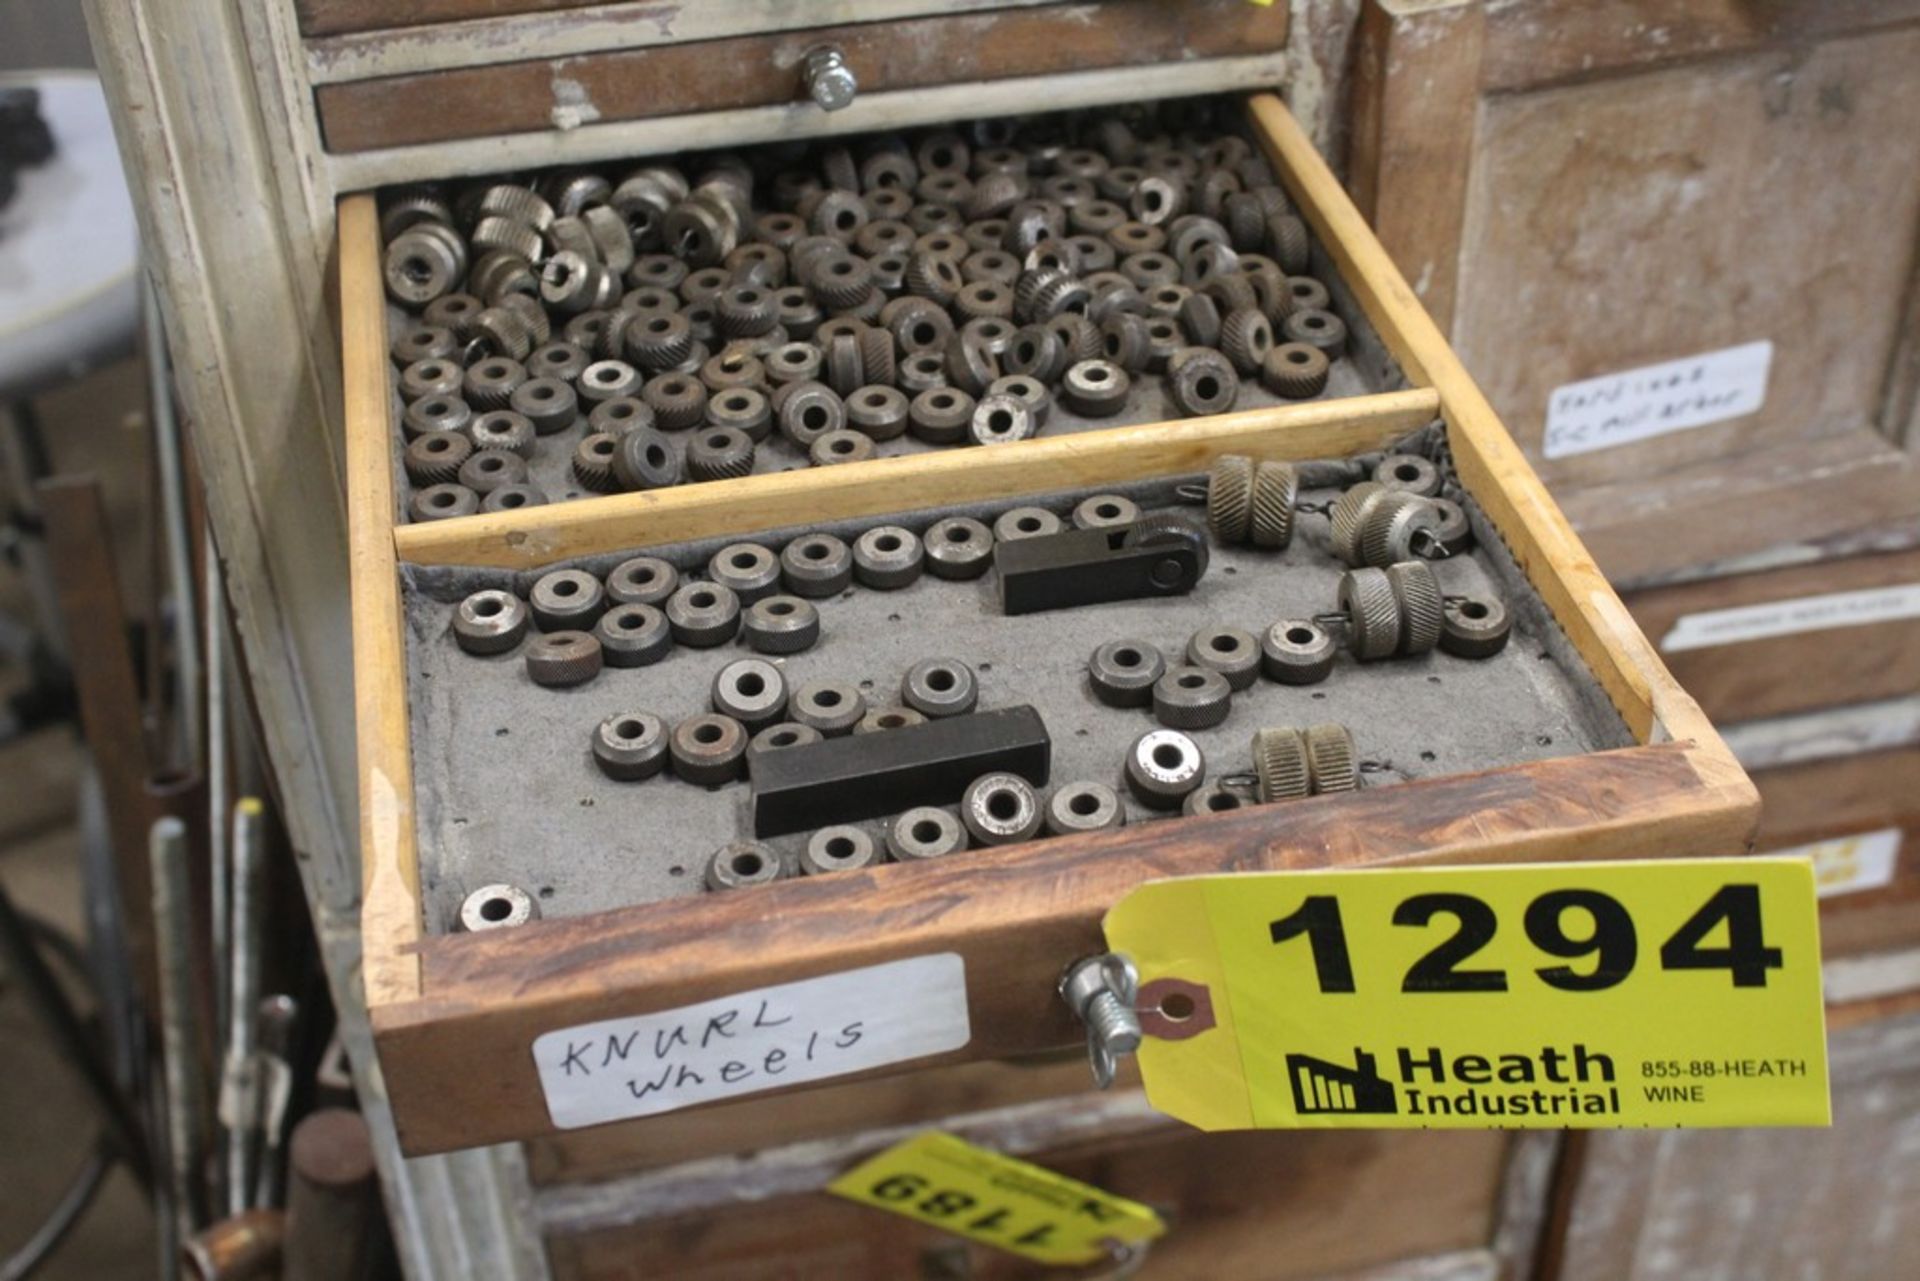 LARGE QTY OF KNURLING WHEELS IN DRAWER